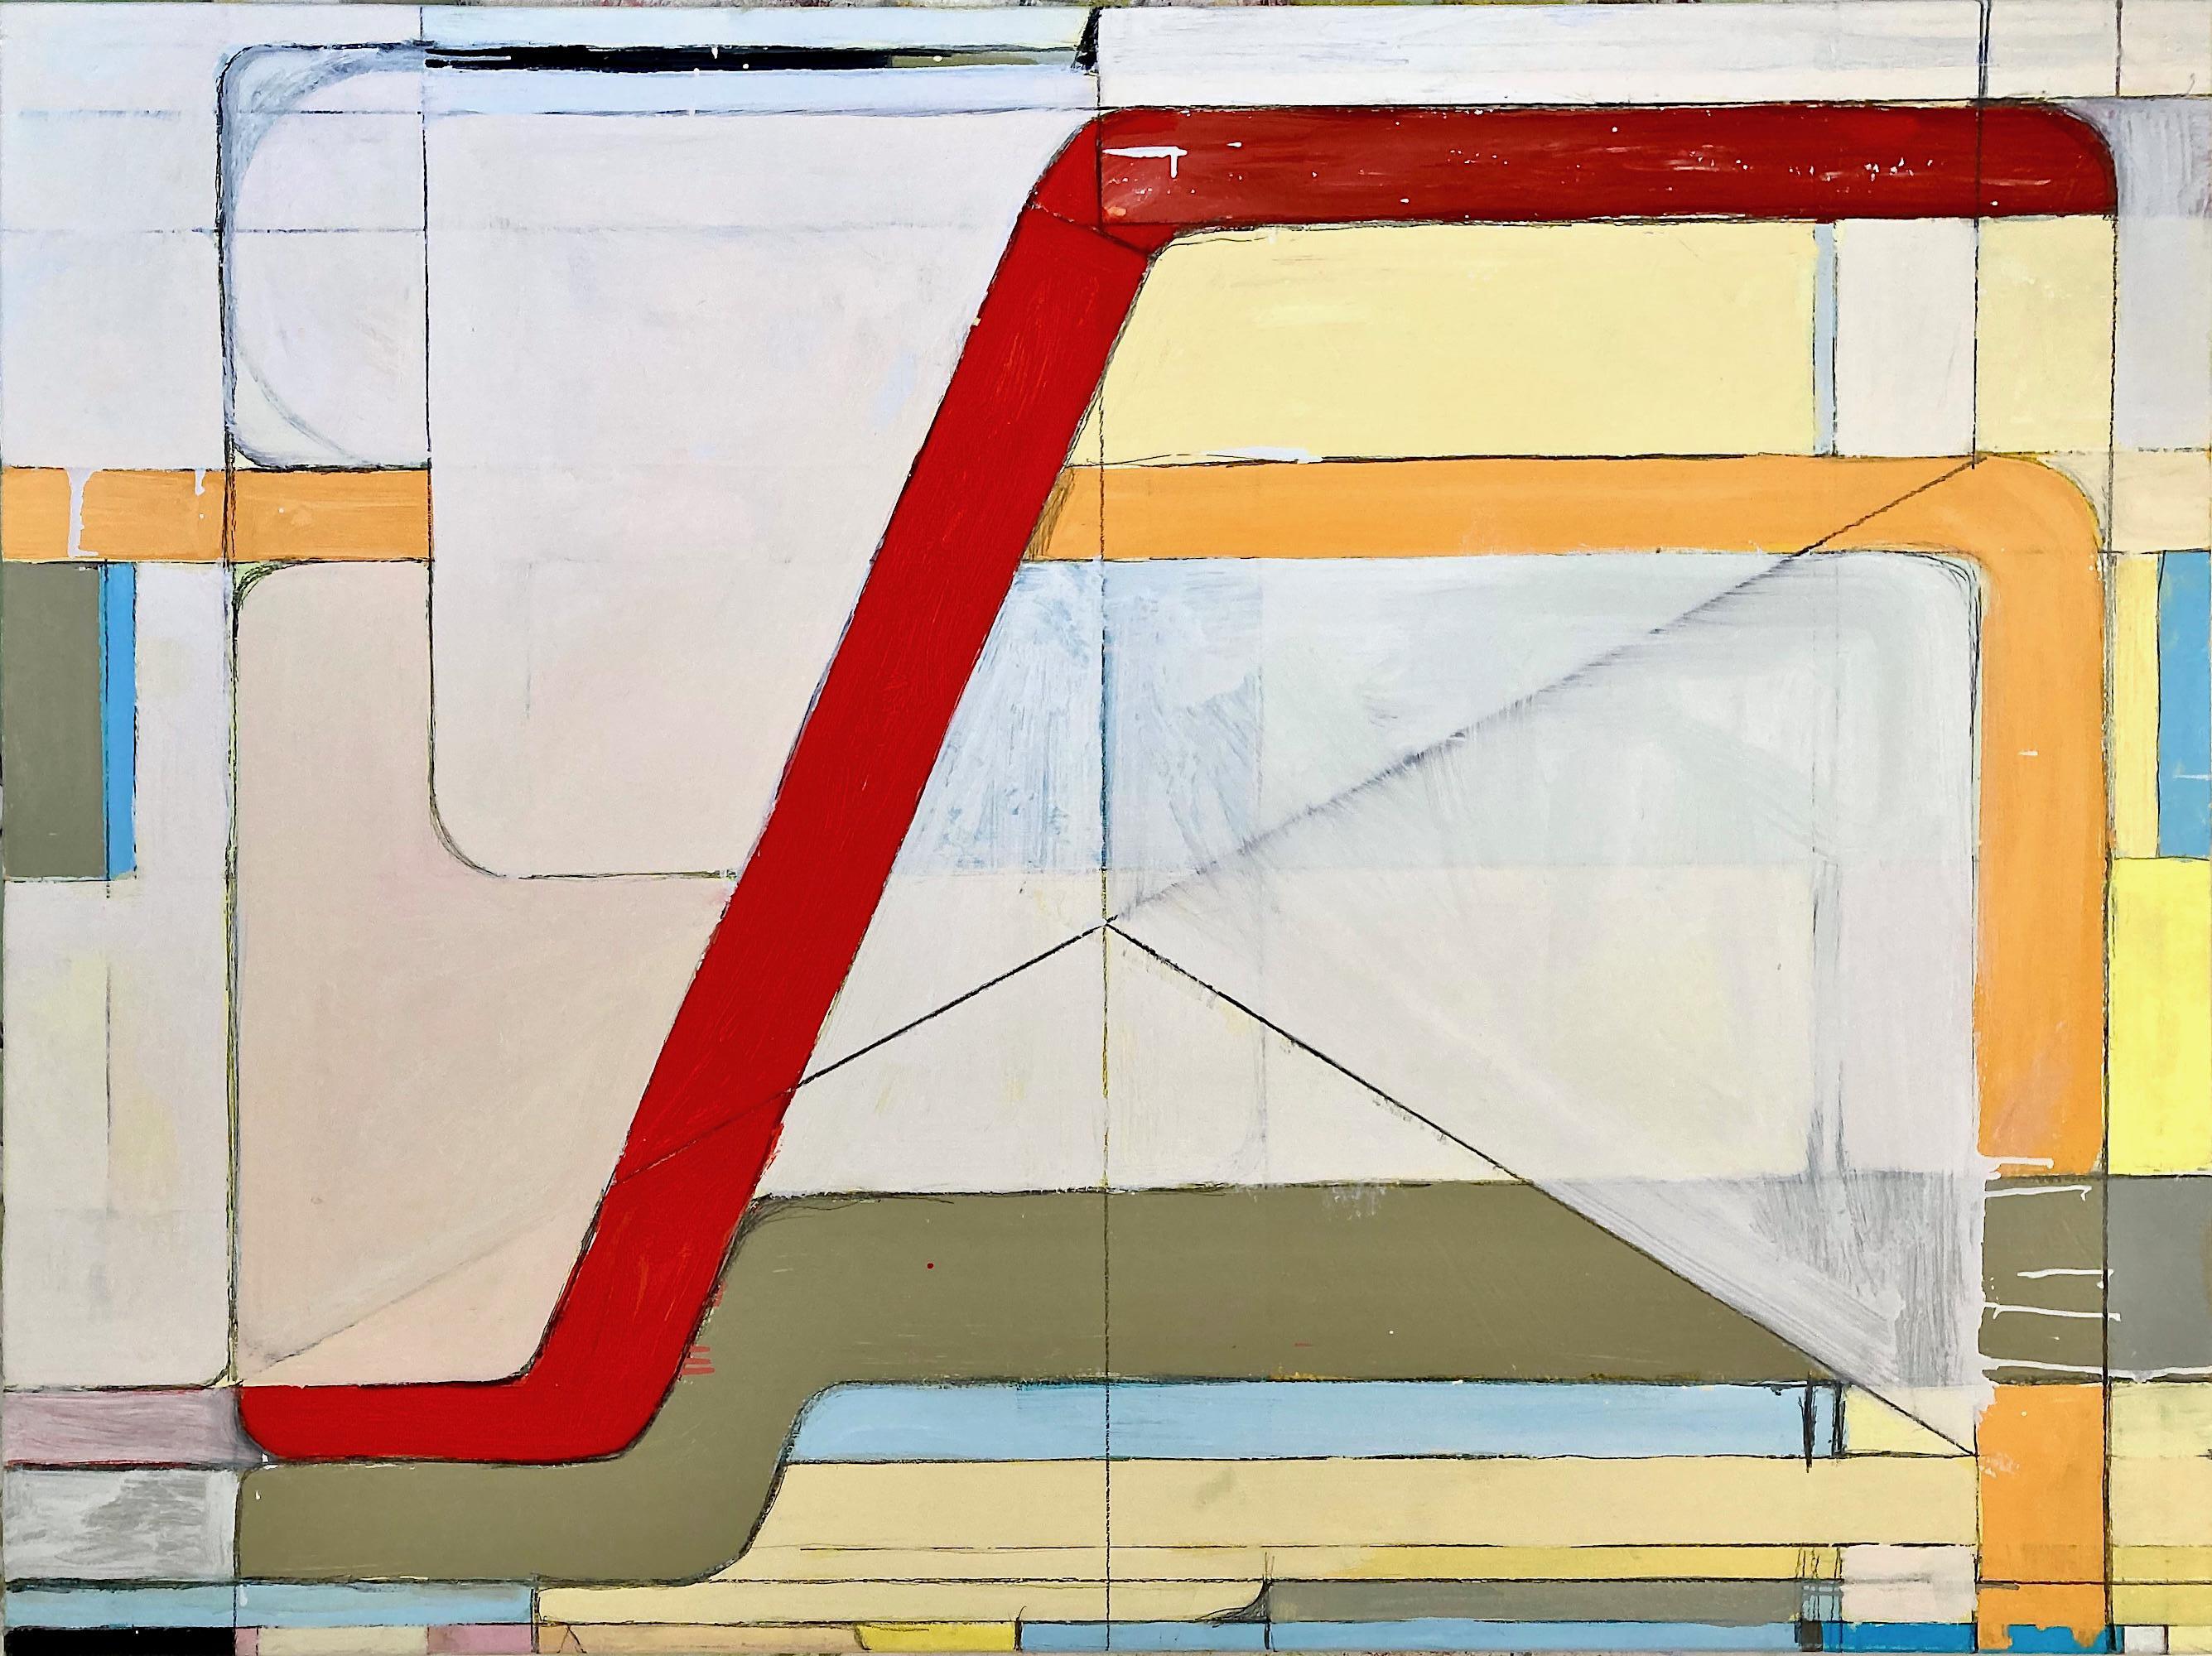 Abstract geometric painting in pastel shades of white, yellow, green, orange, and red 
"Ultraviolence" painted by Hudson Valley, NY based painter, Anthony Finta, in 2022
36 x 48 inches  oil, enamel and pencil collage on canvas
37 x 49 x 1.5 inches